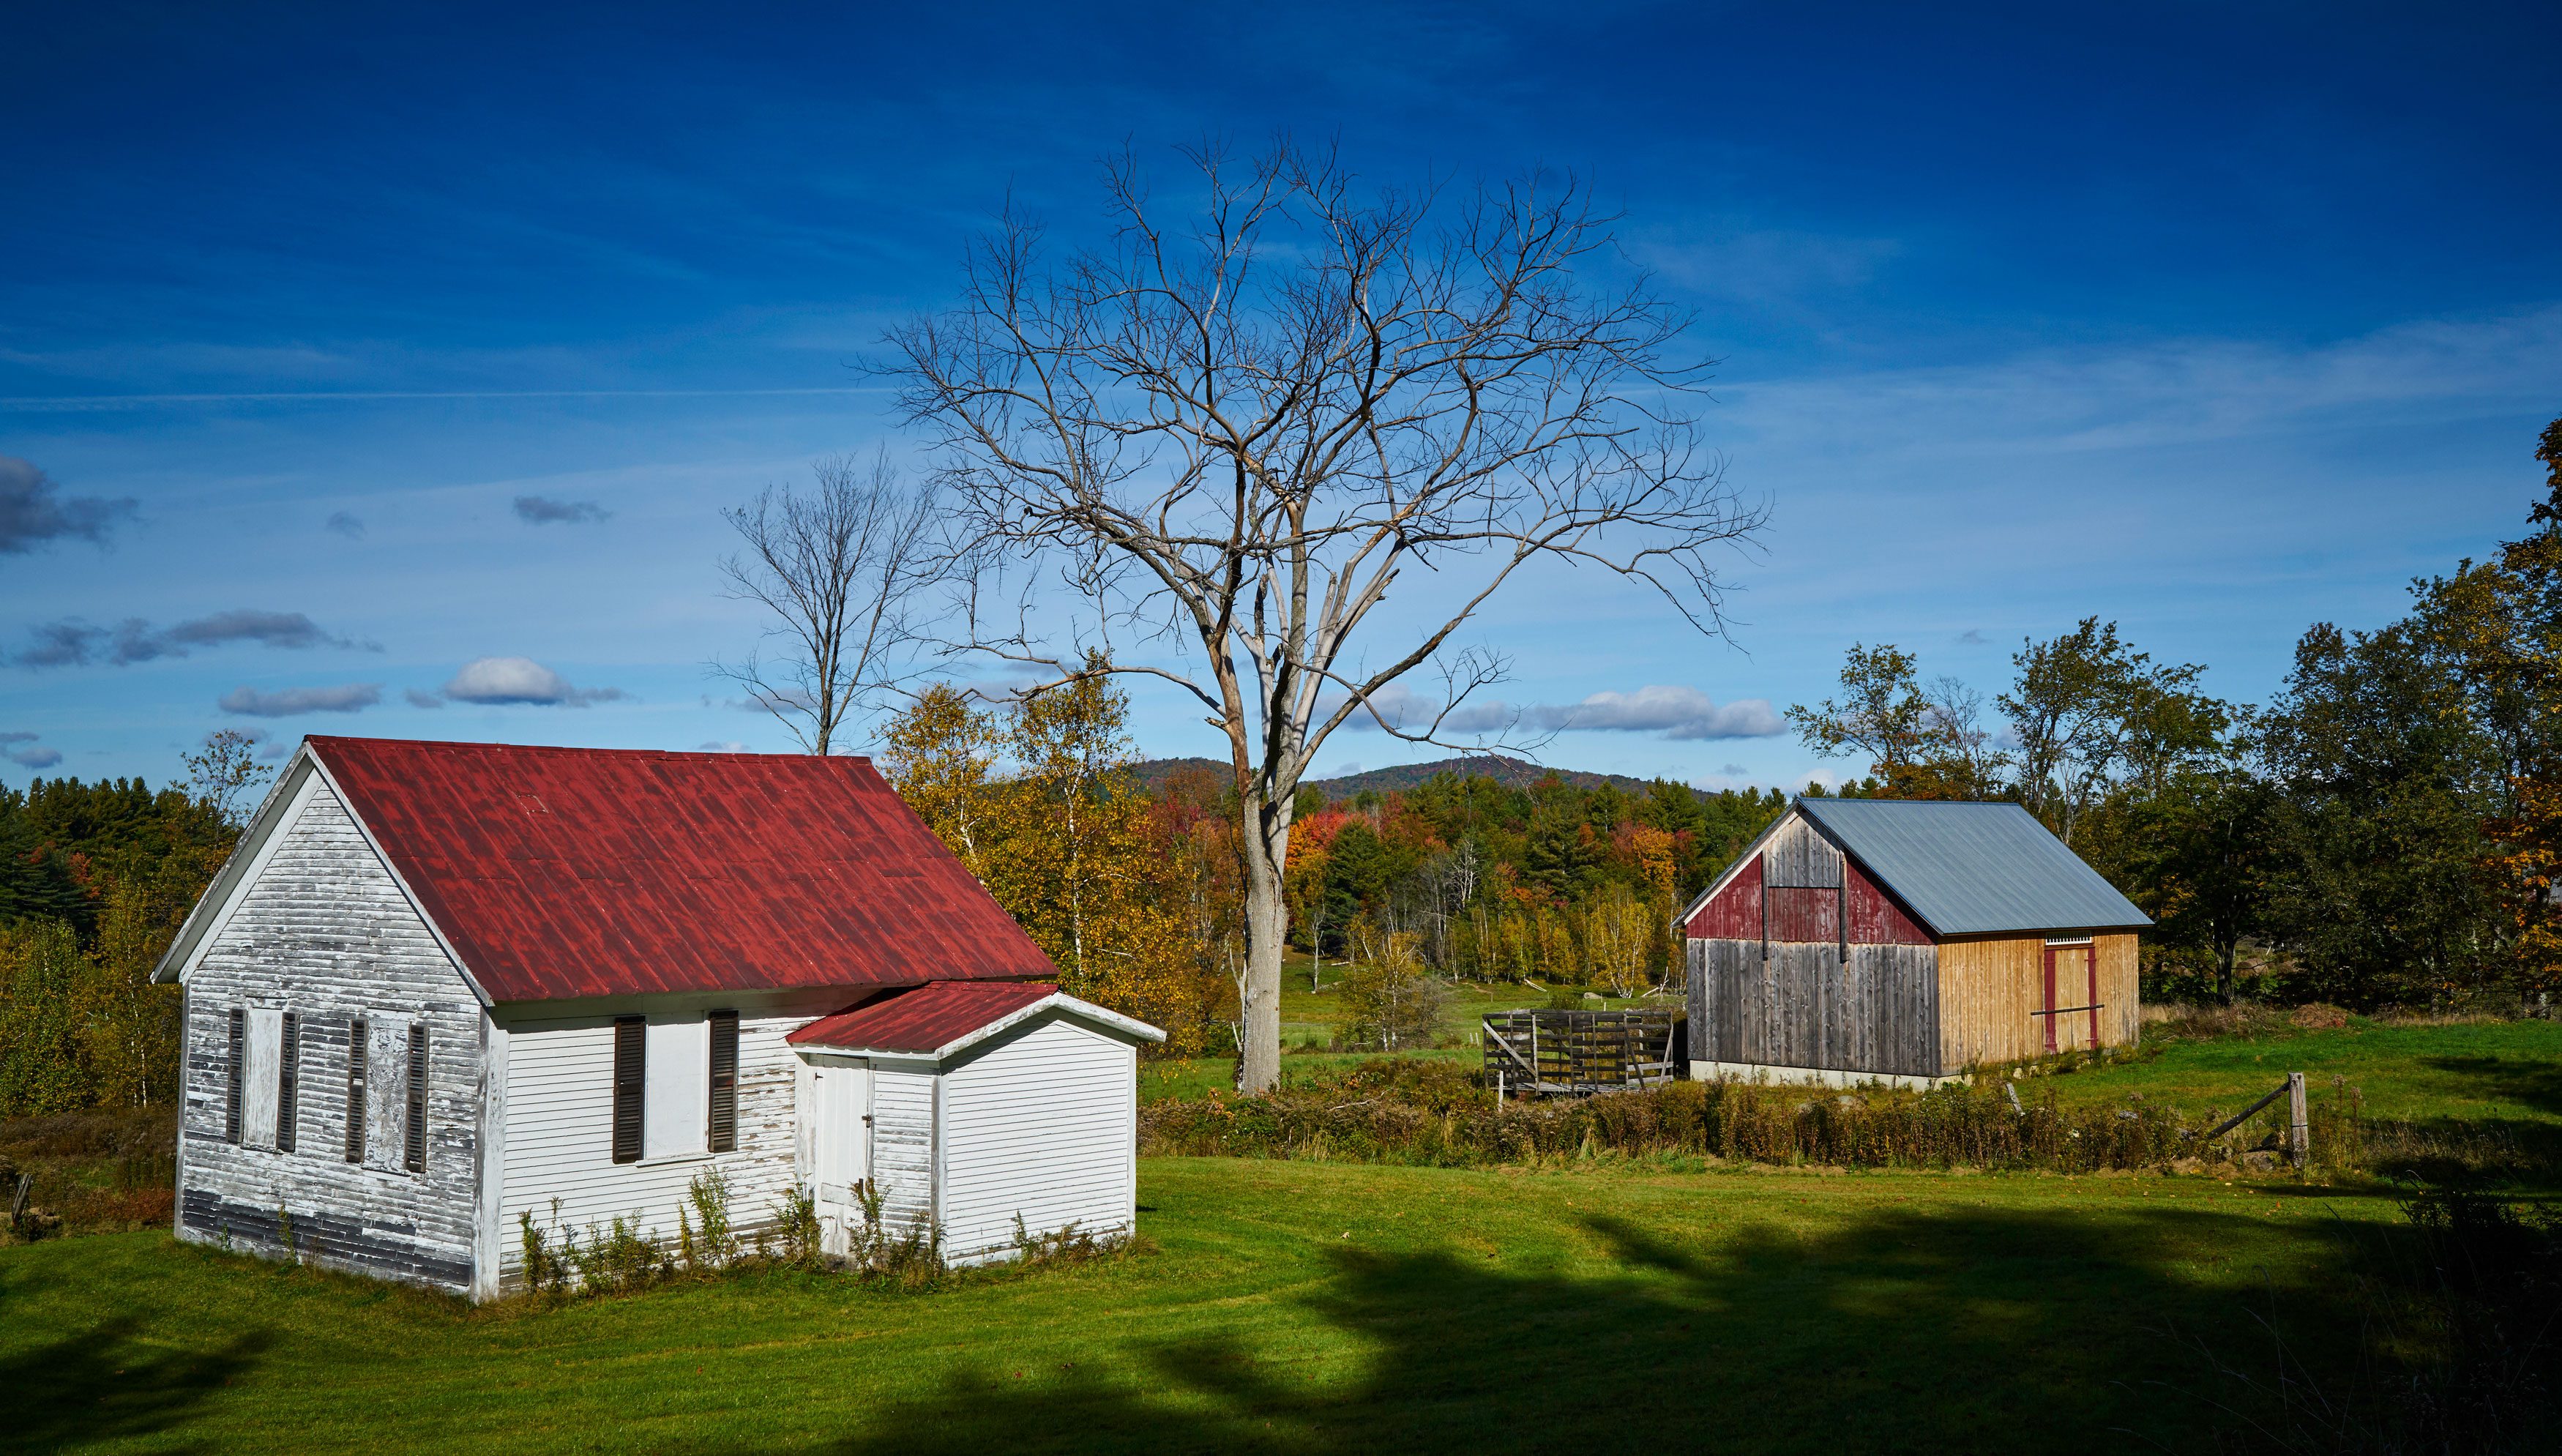 Two Barns, Vermont